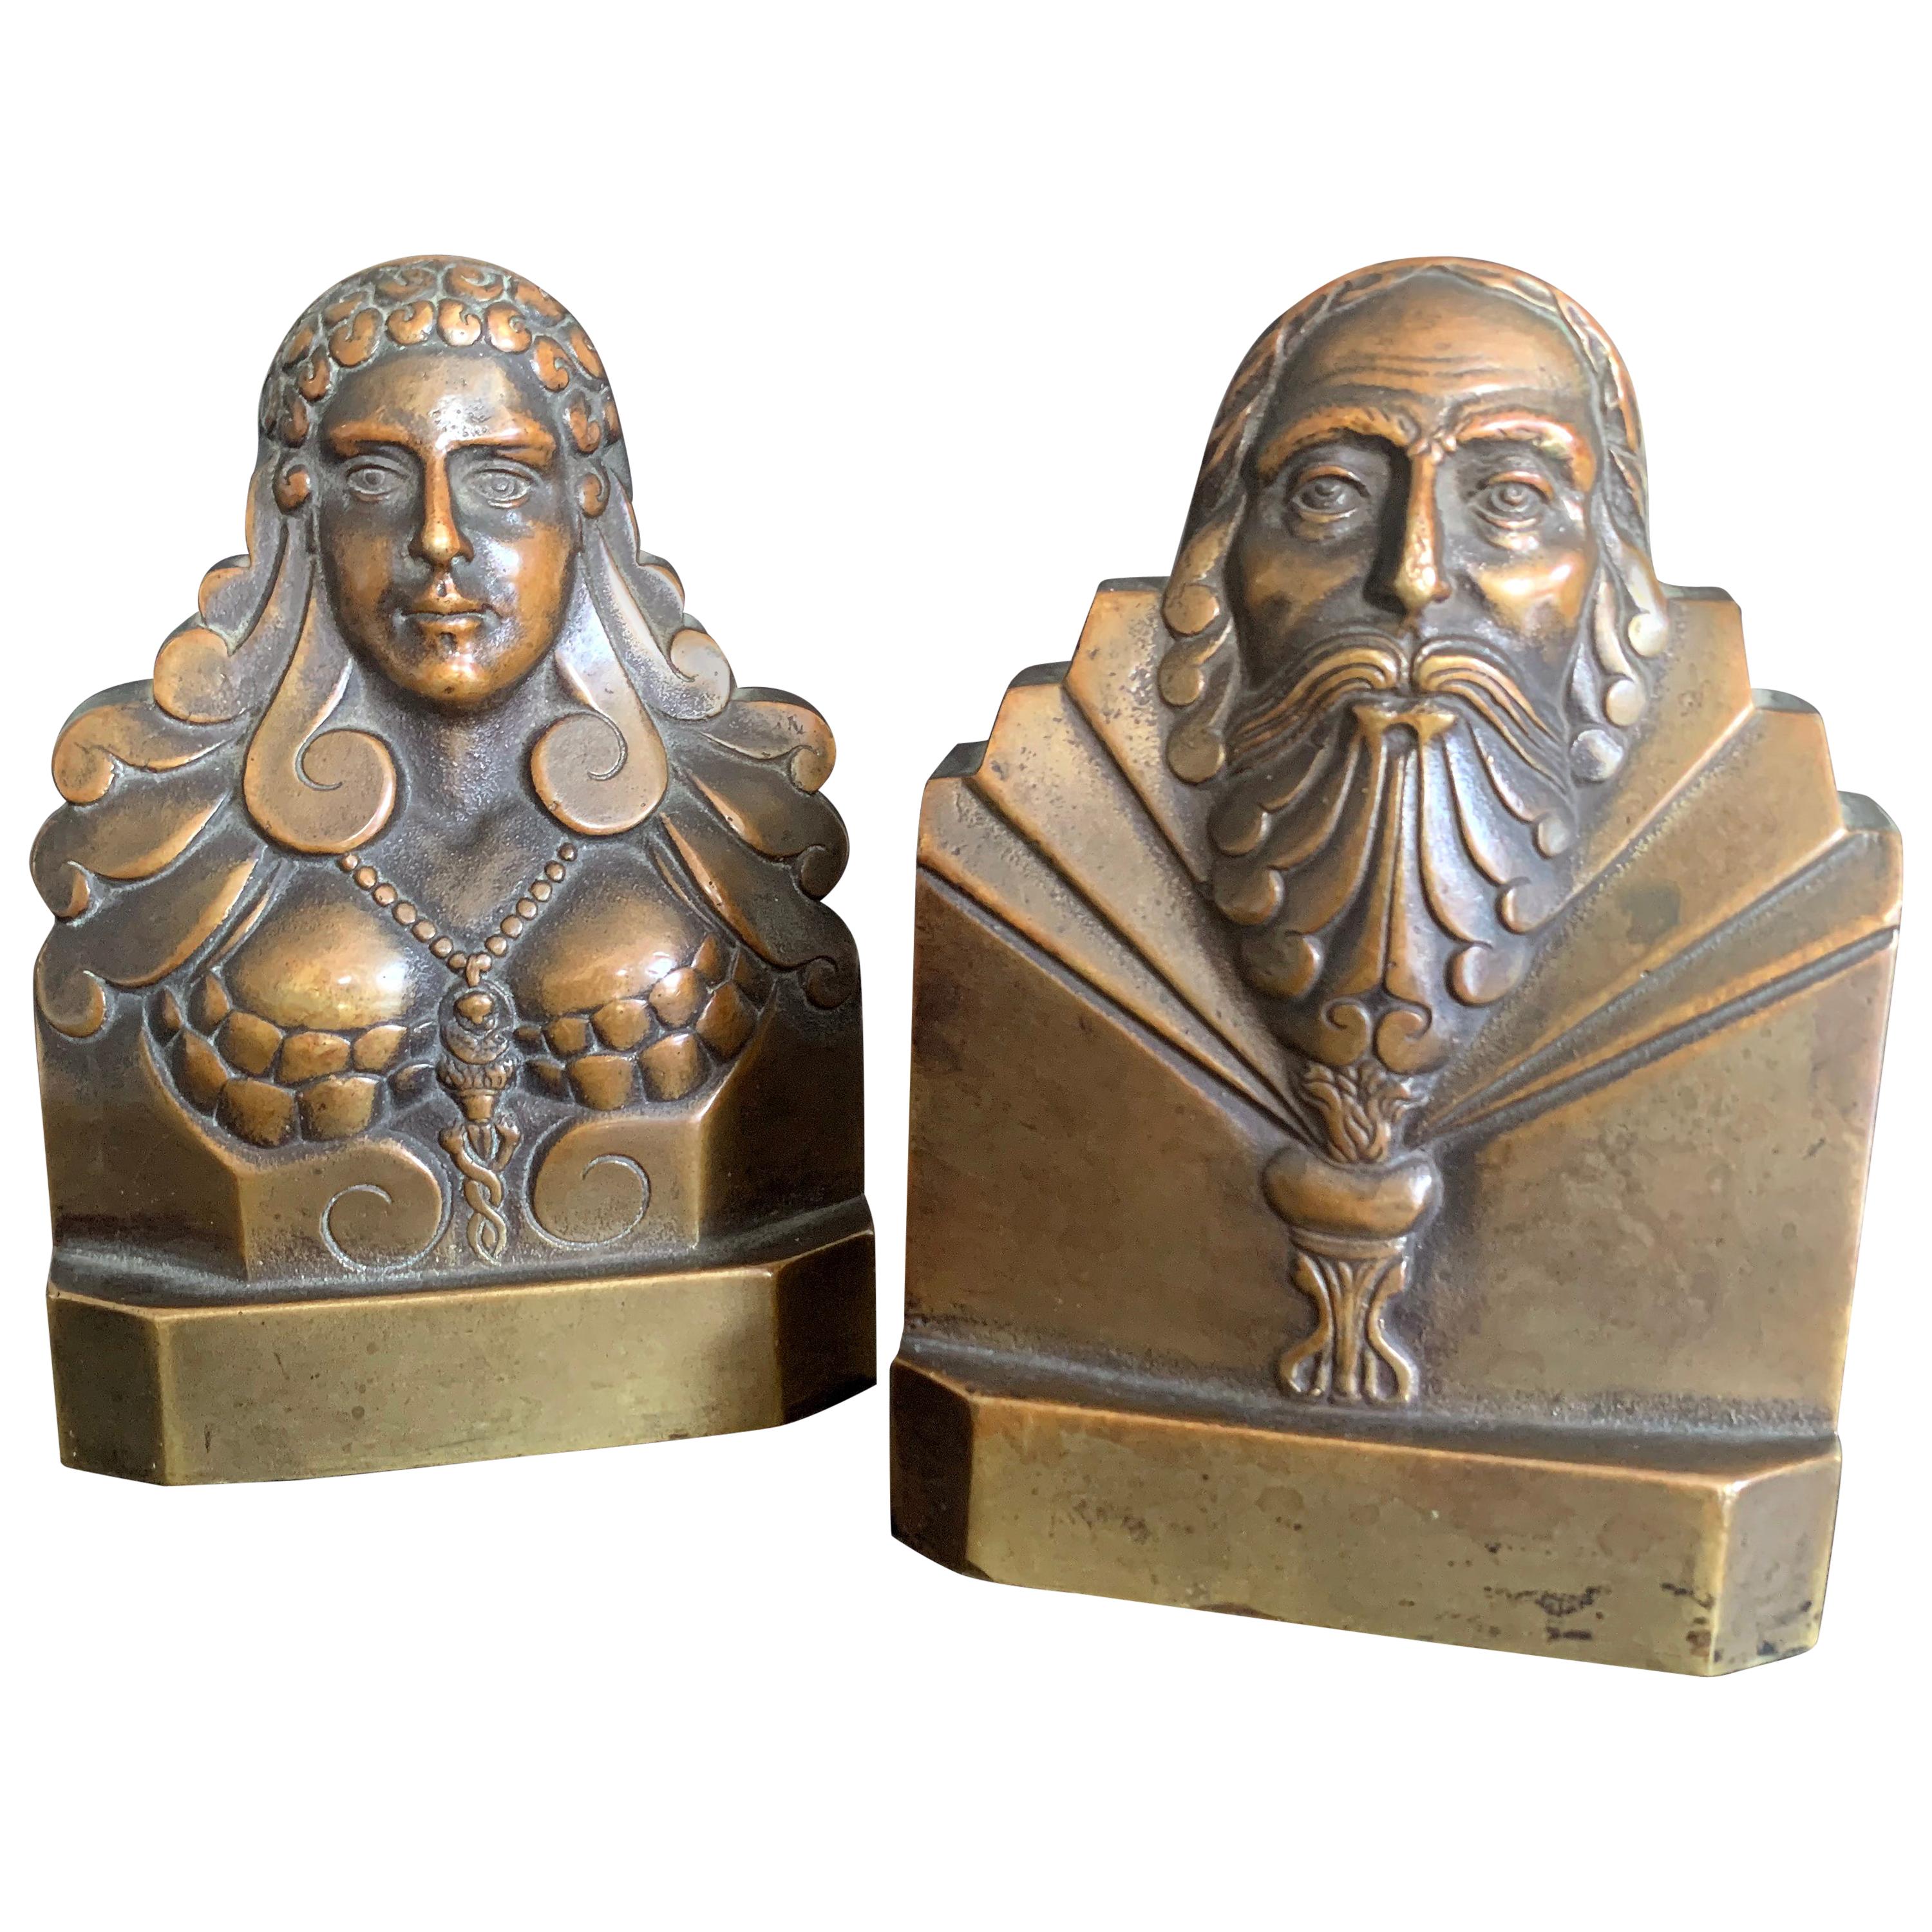 "Elizabethan Couple, " Male and Female Bronze Bookends by Jackson Co., Brooklyn